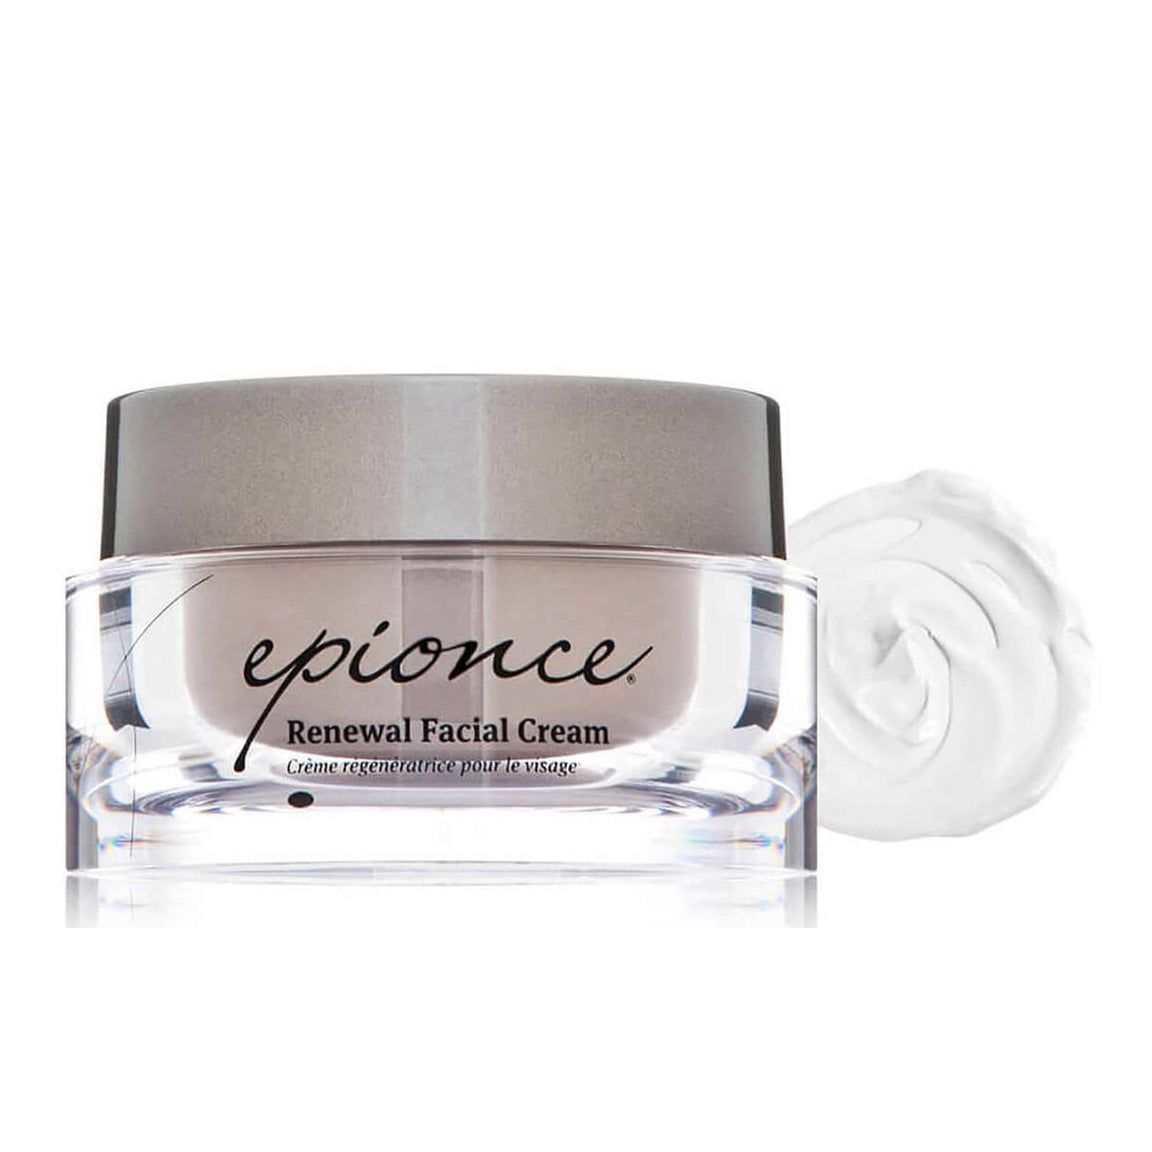 Epionce Renewal Facial Cream from MyExceptionalSkinCare.com Texture